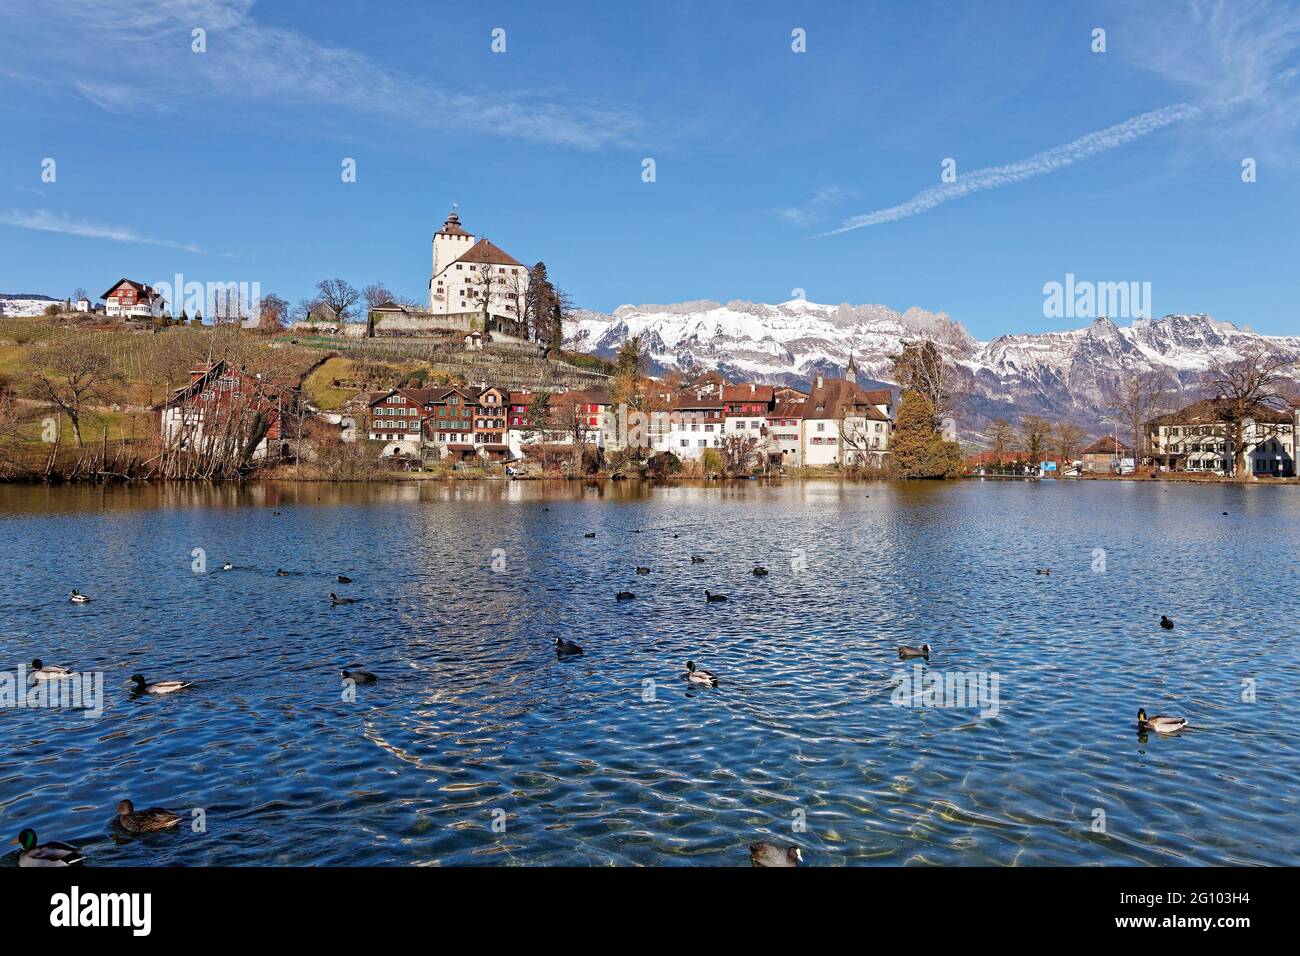 Historical village Werdenberg with castle and ducks swimming in Werdenberg's lake Stock Photo